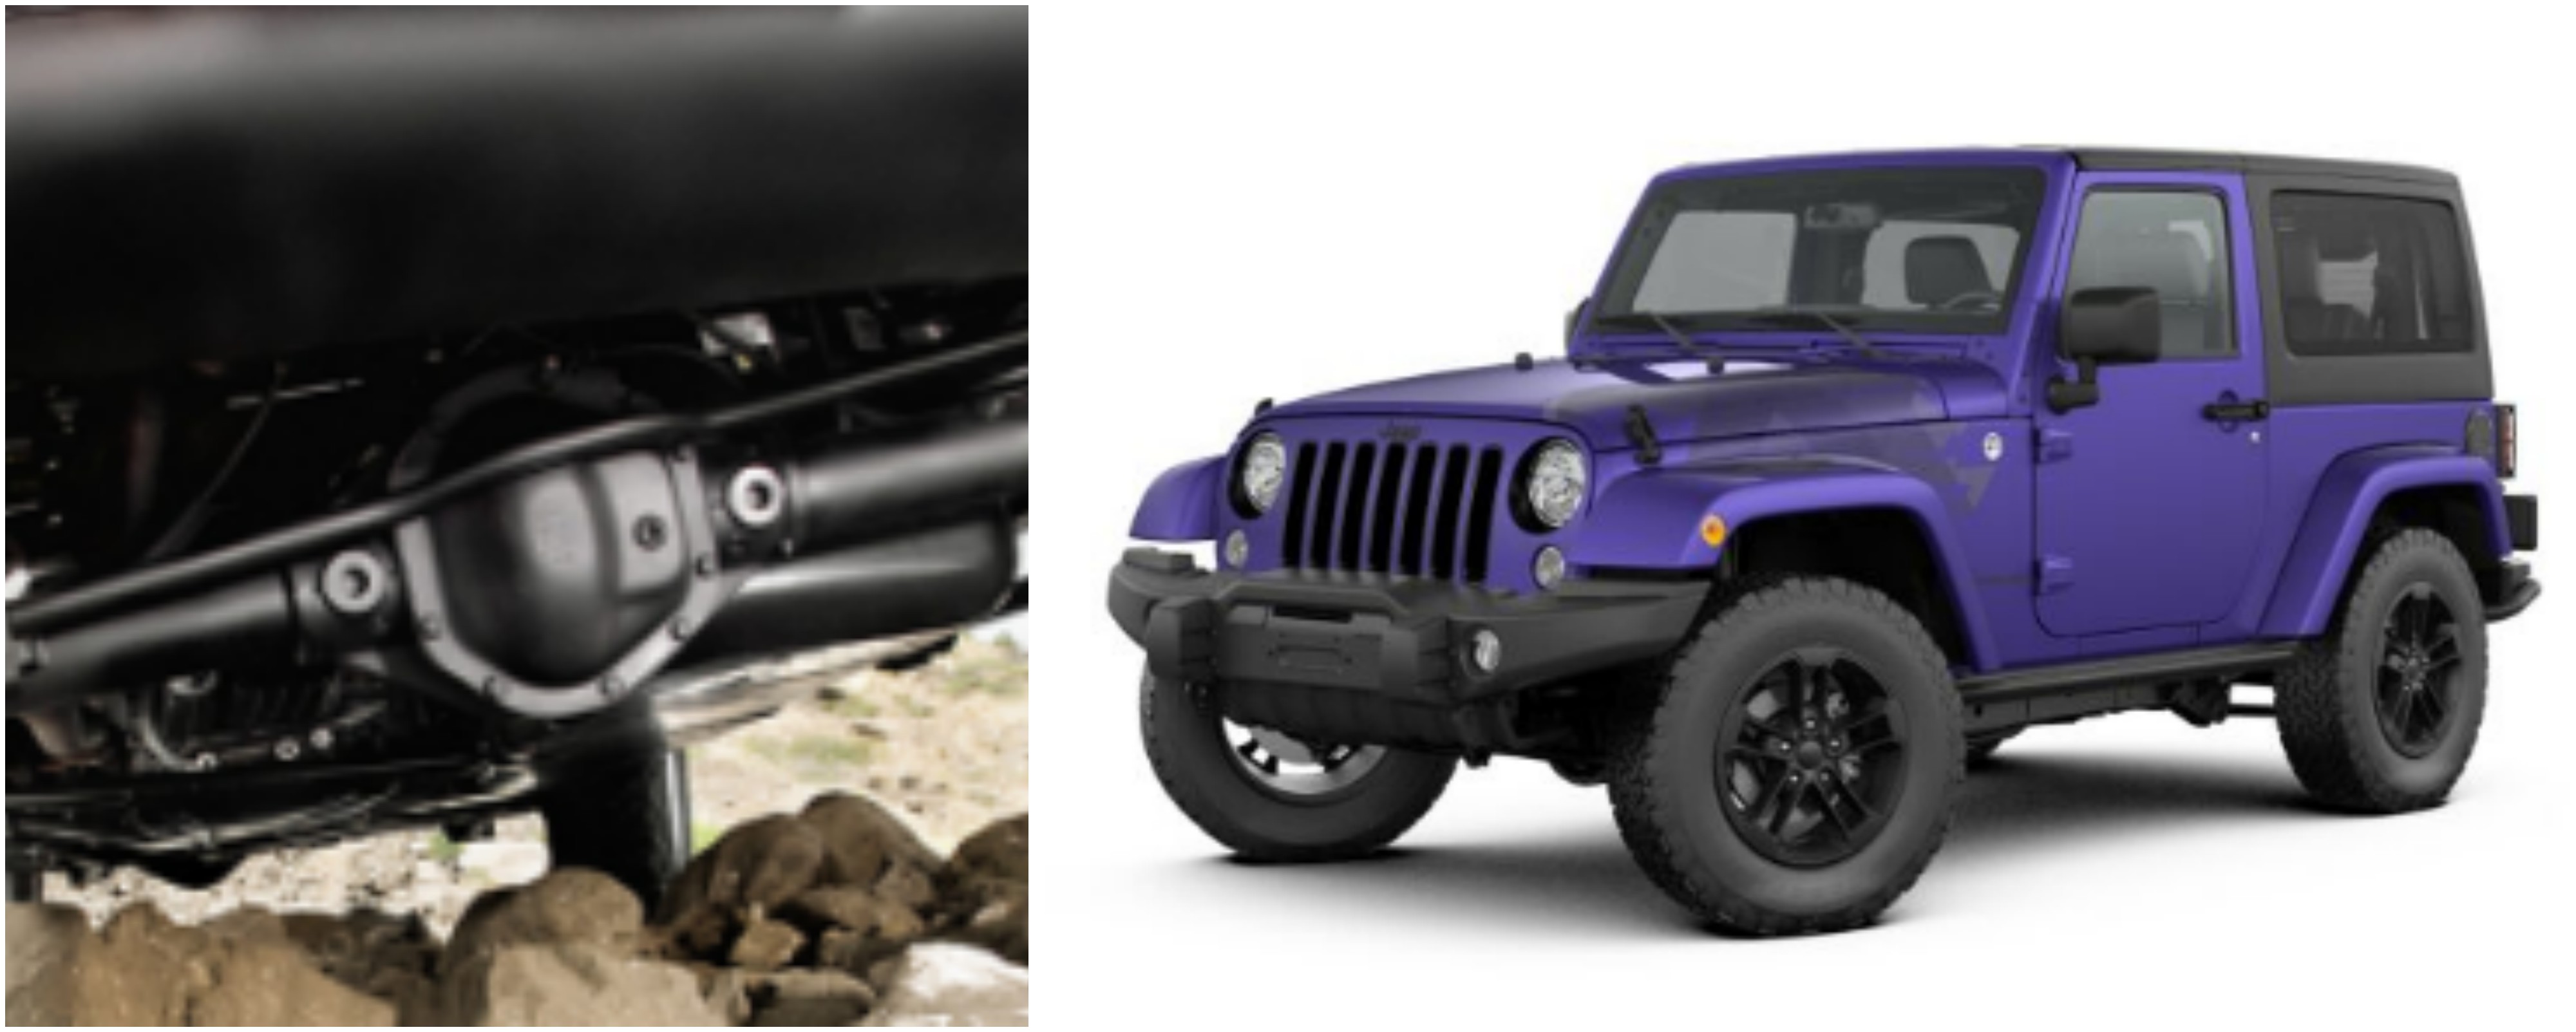 Jeep Wrangler JK Special Edition Models: What Makes Them So Special? -  Offroad Elements, Inc.